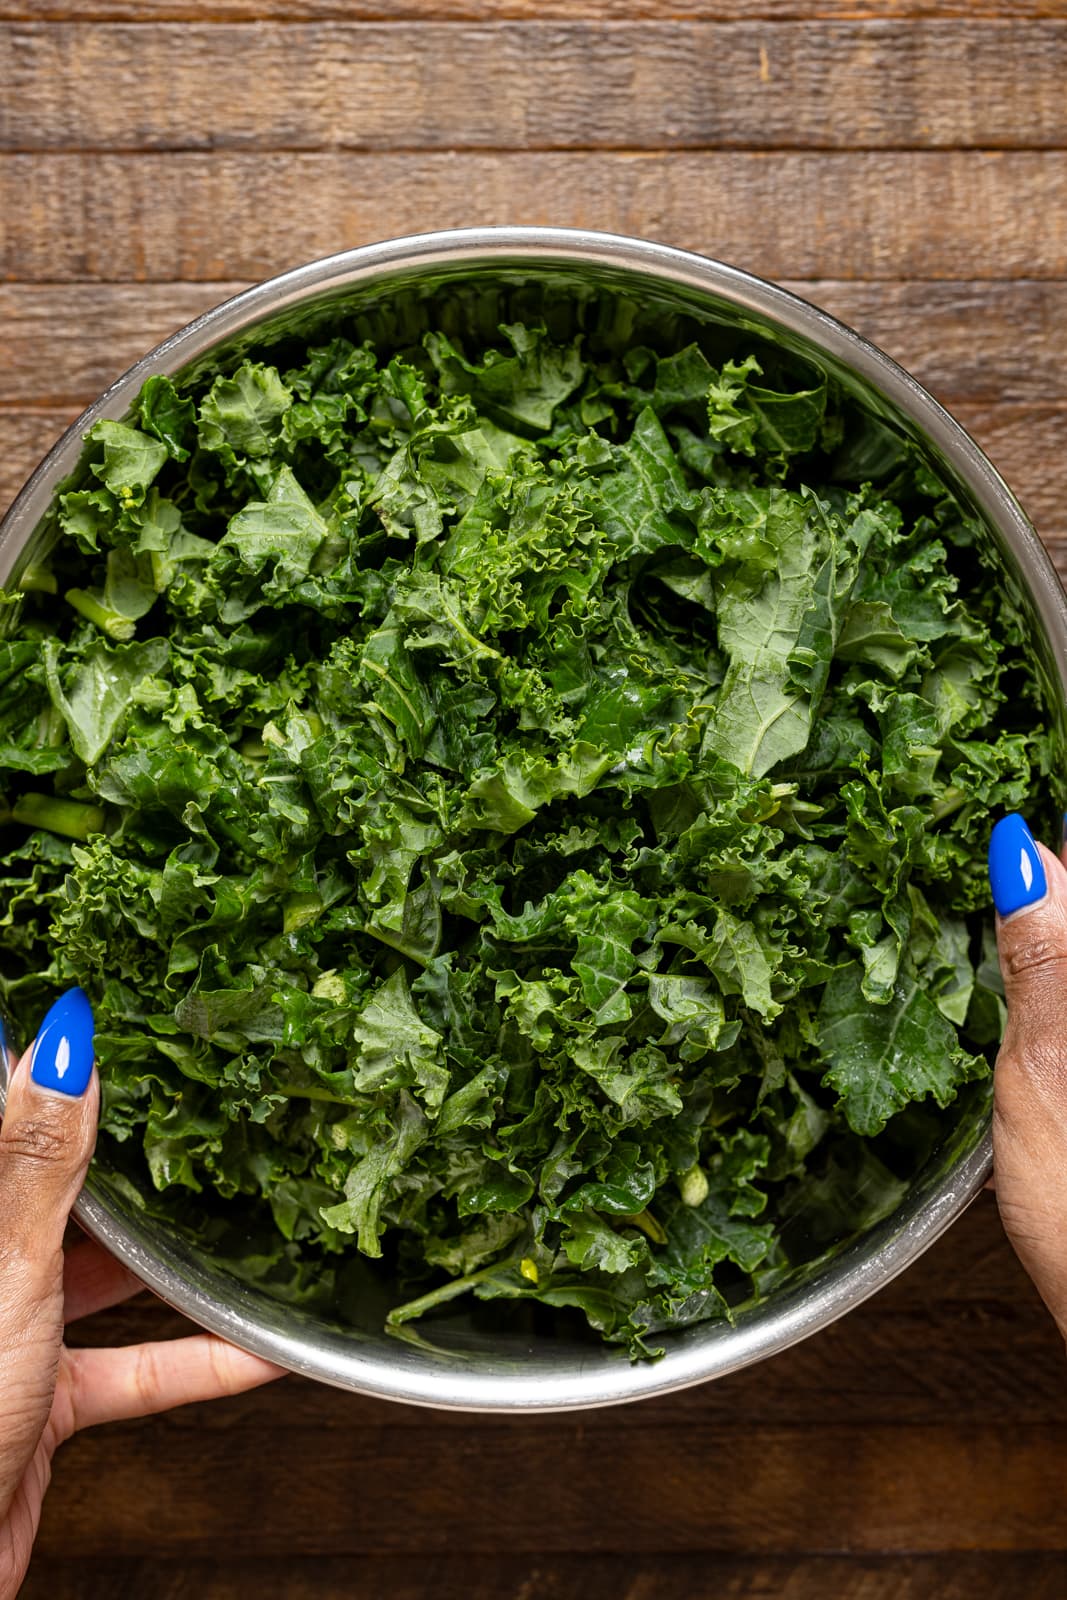 Bowl of chopped kale being held.